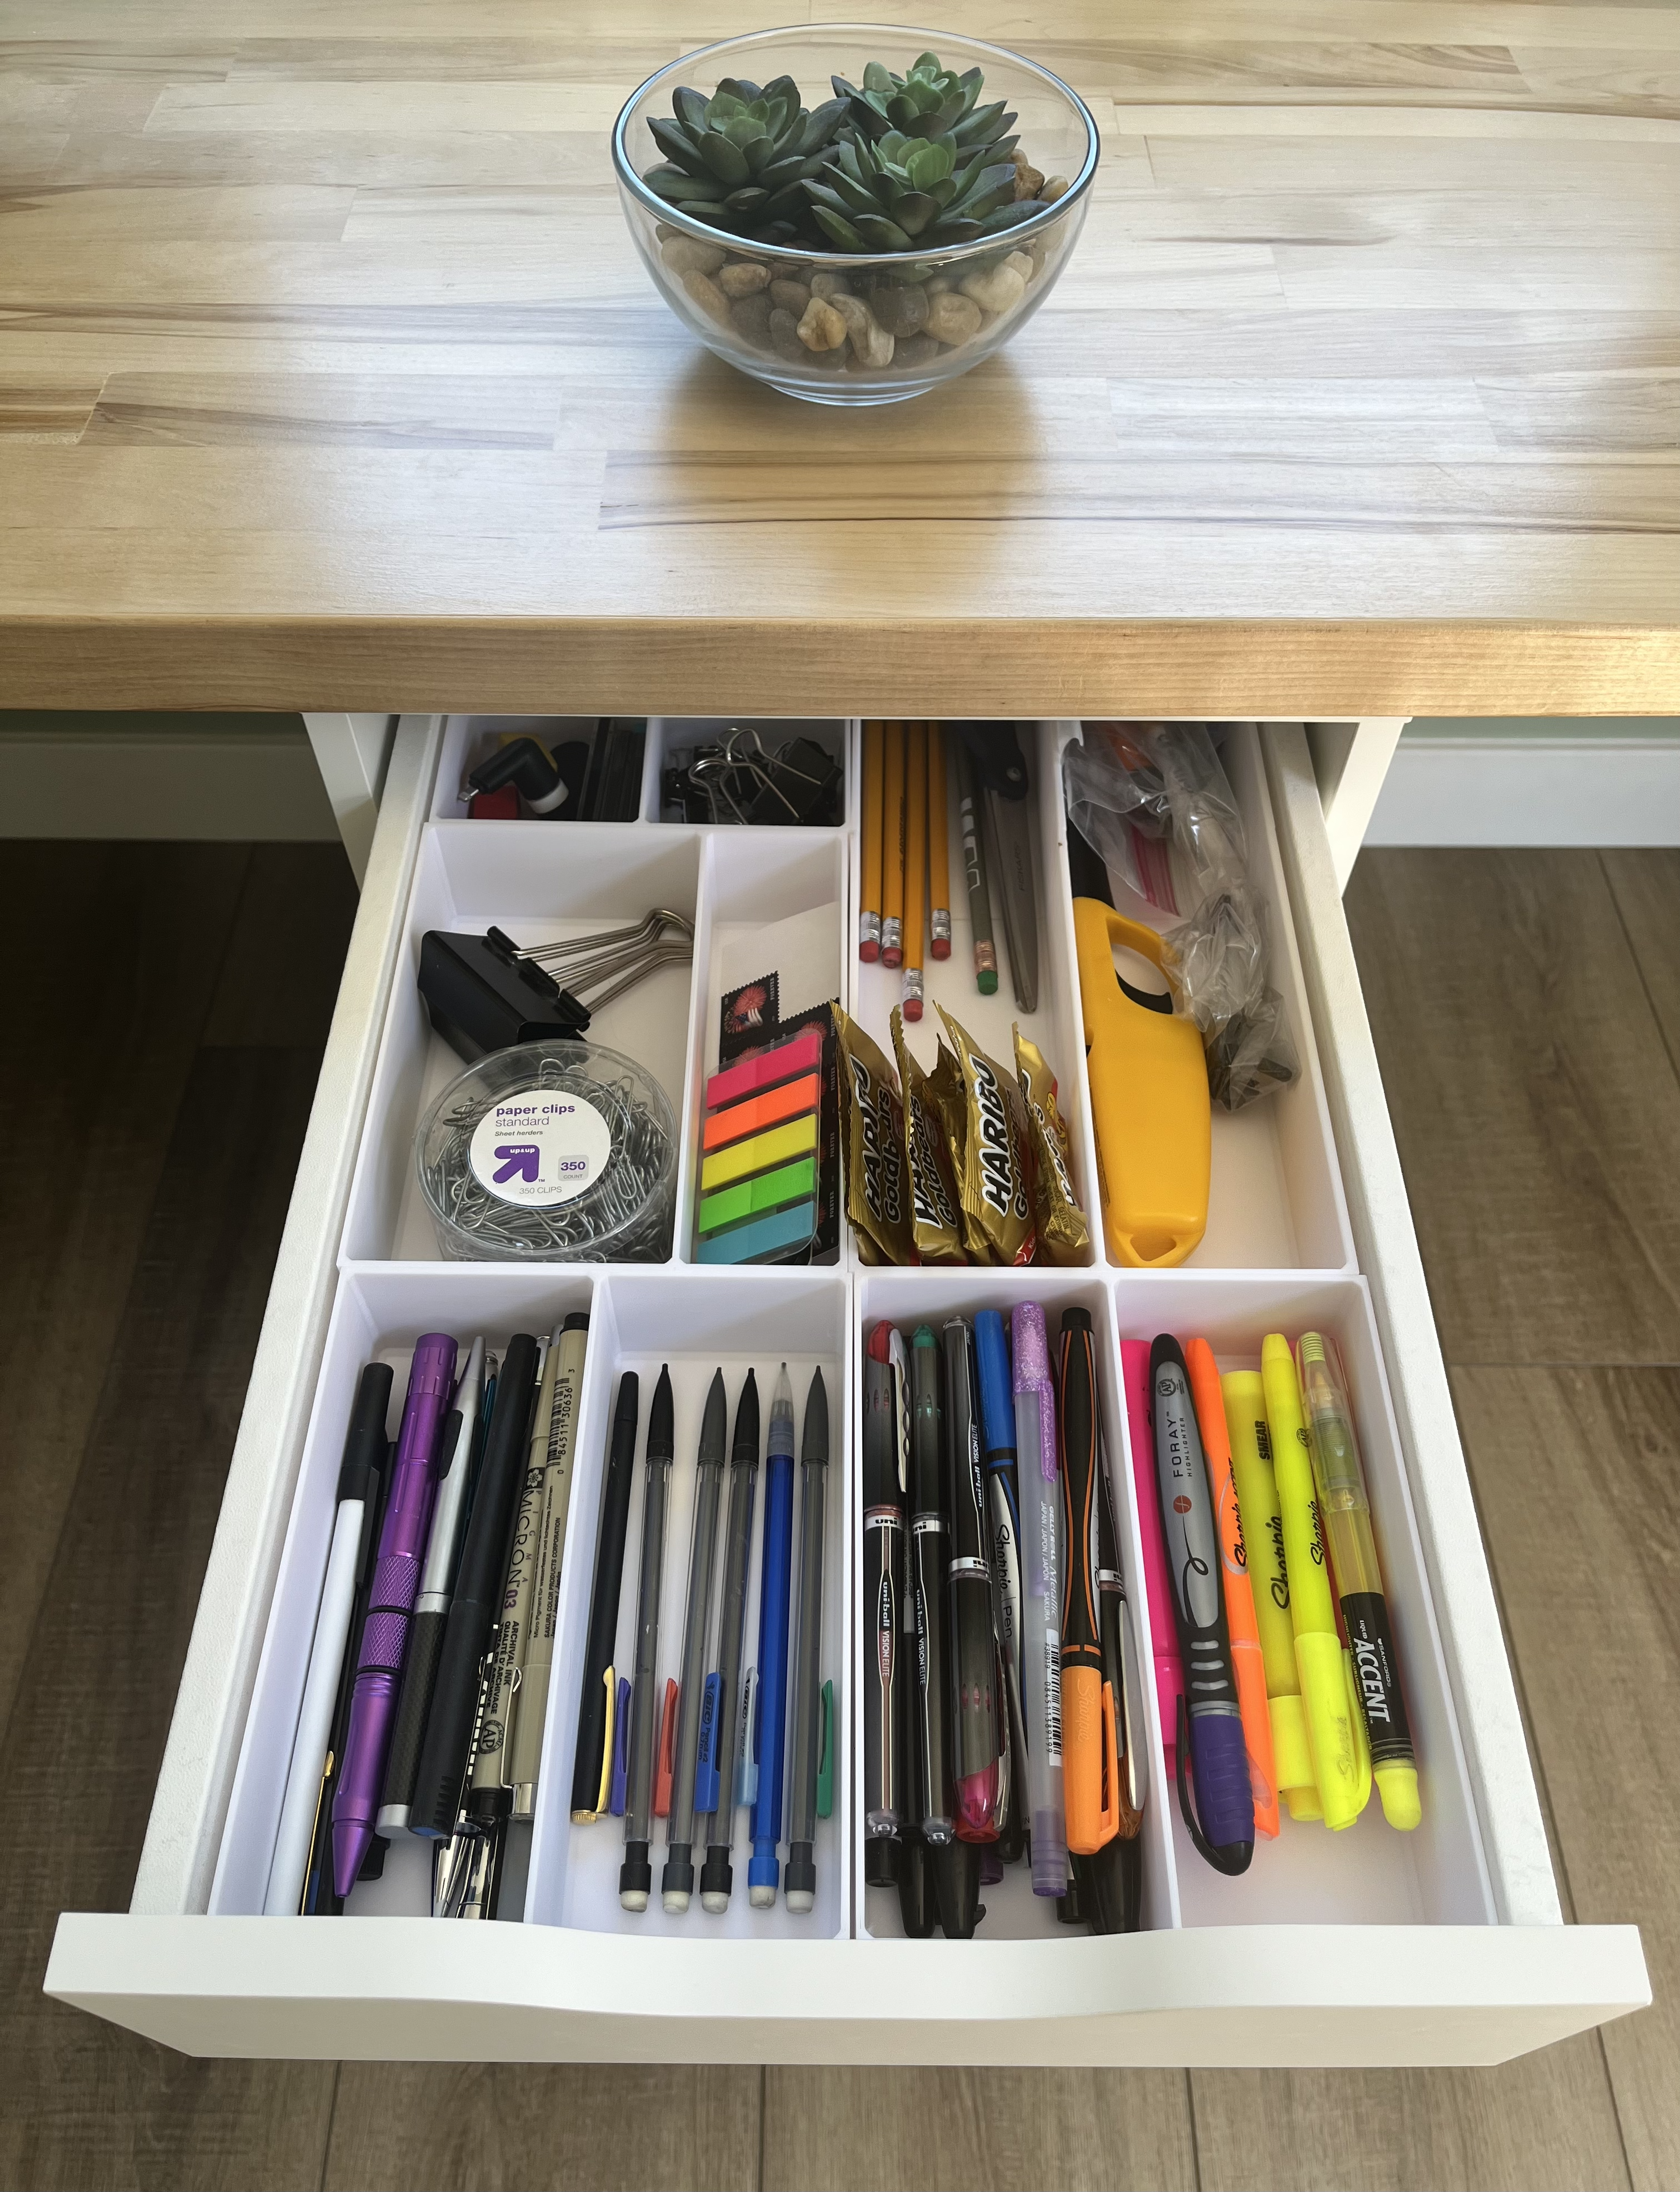 organize your drawers 3D printed drawer inserts